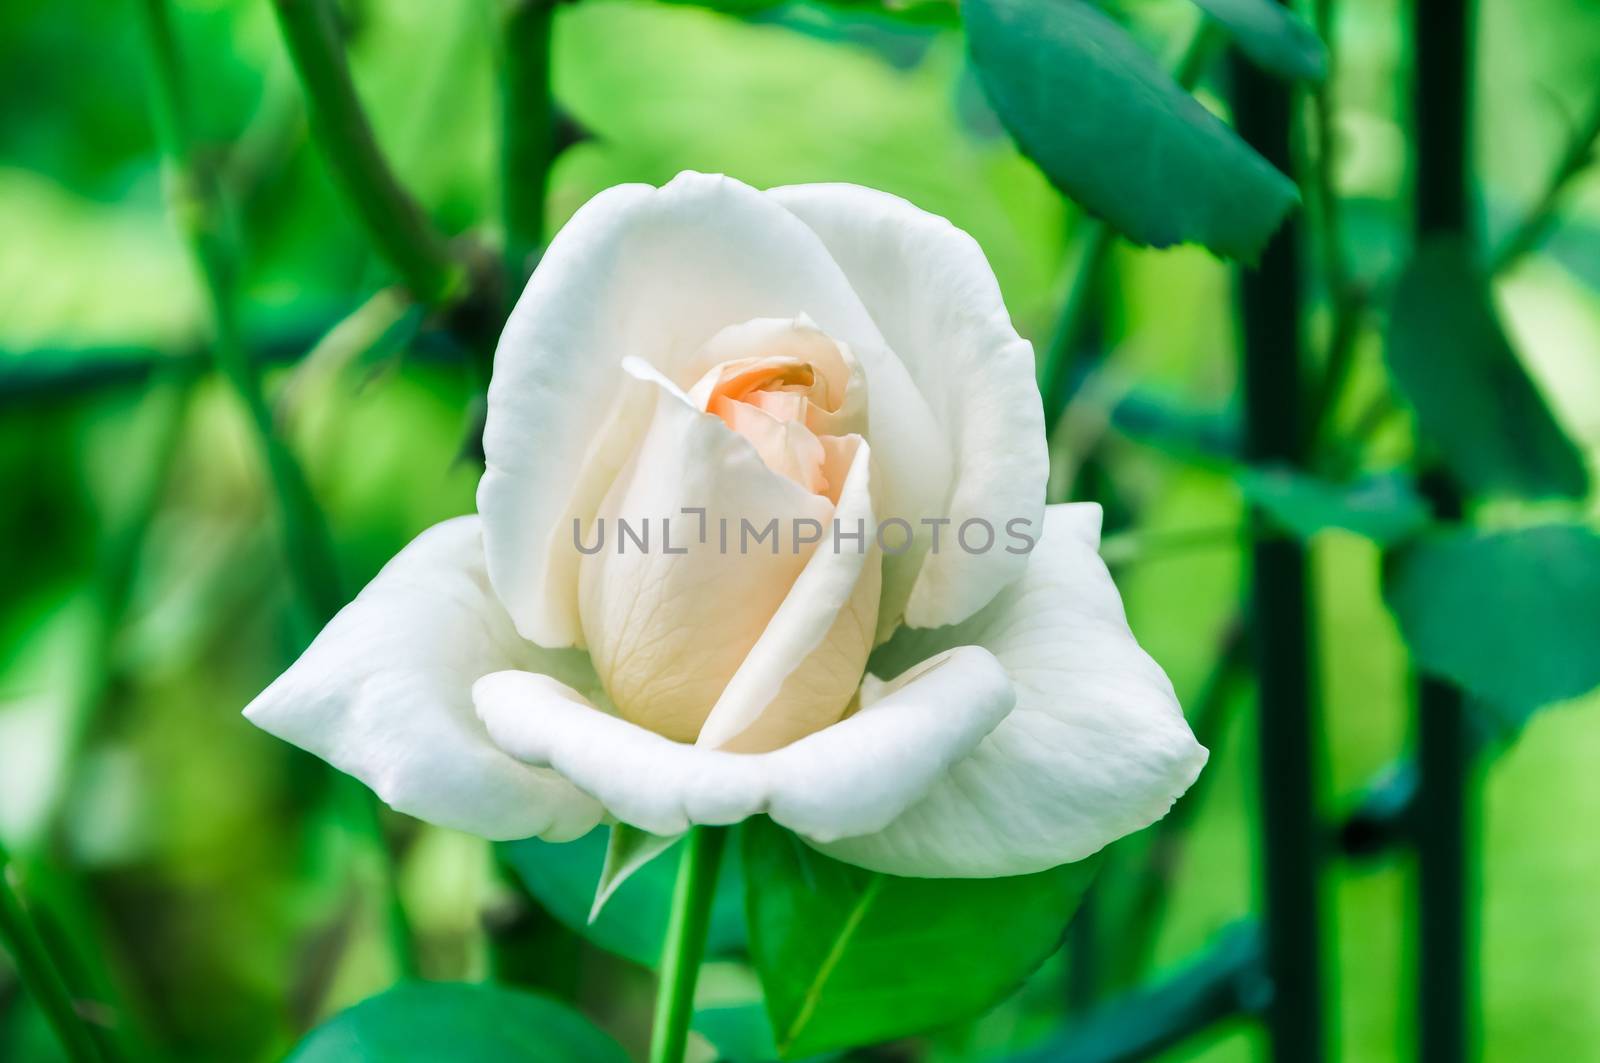 WHITE ROSES IN THE GARDEN. Nature background